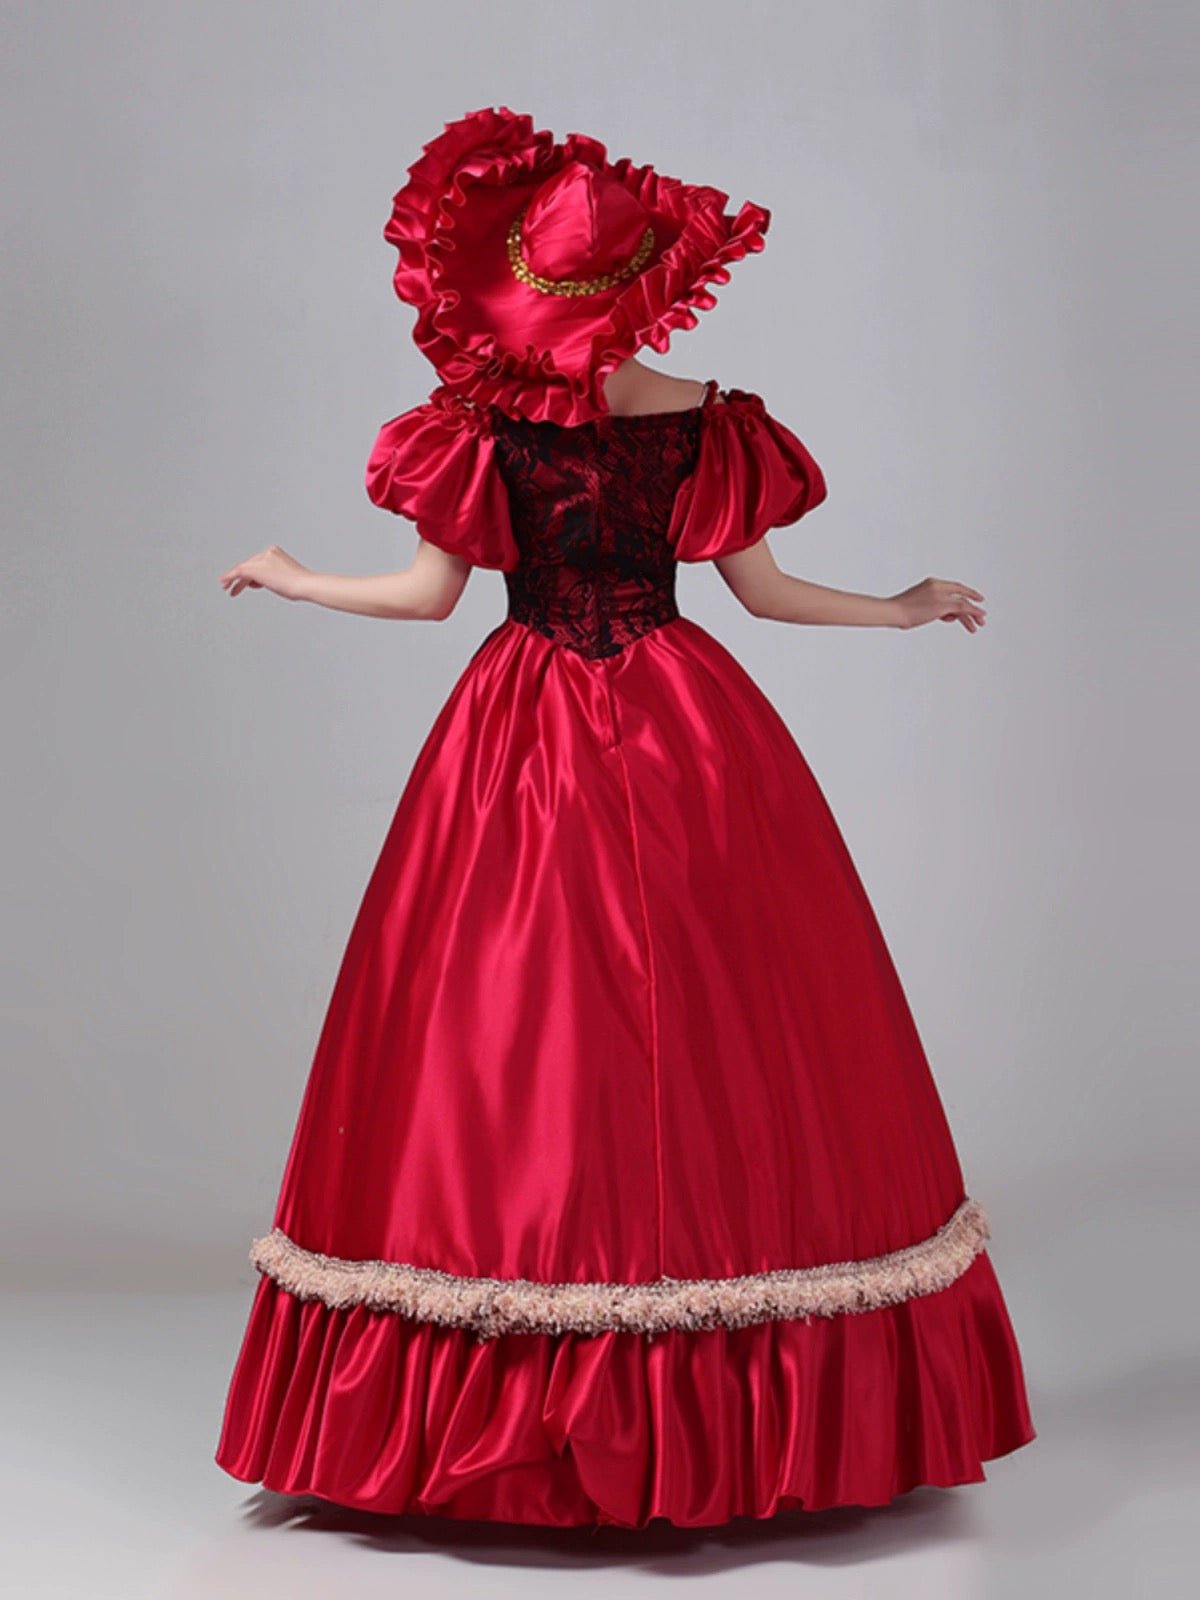 Radiant Red Rococo Style Dress with Black Lace Elegance – Victorian-Inspired Satin Ball Gown with Ruffled Sleeves Plus Size - WonderlandByLilian